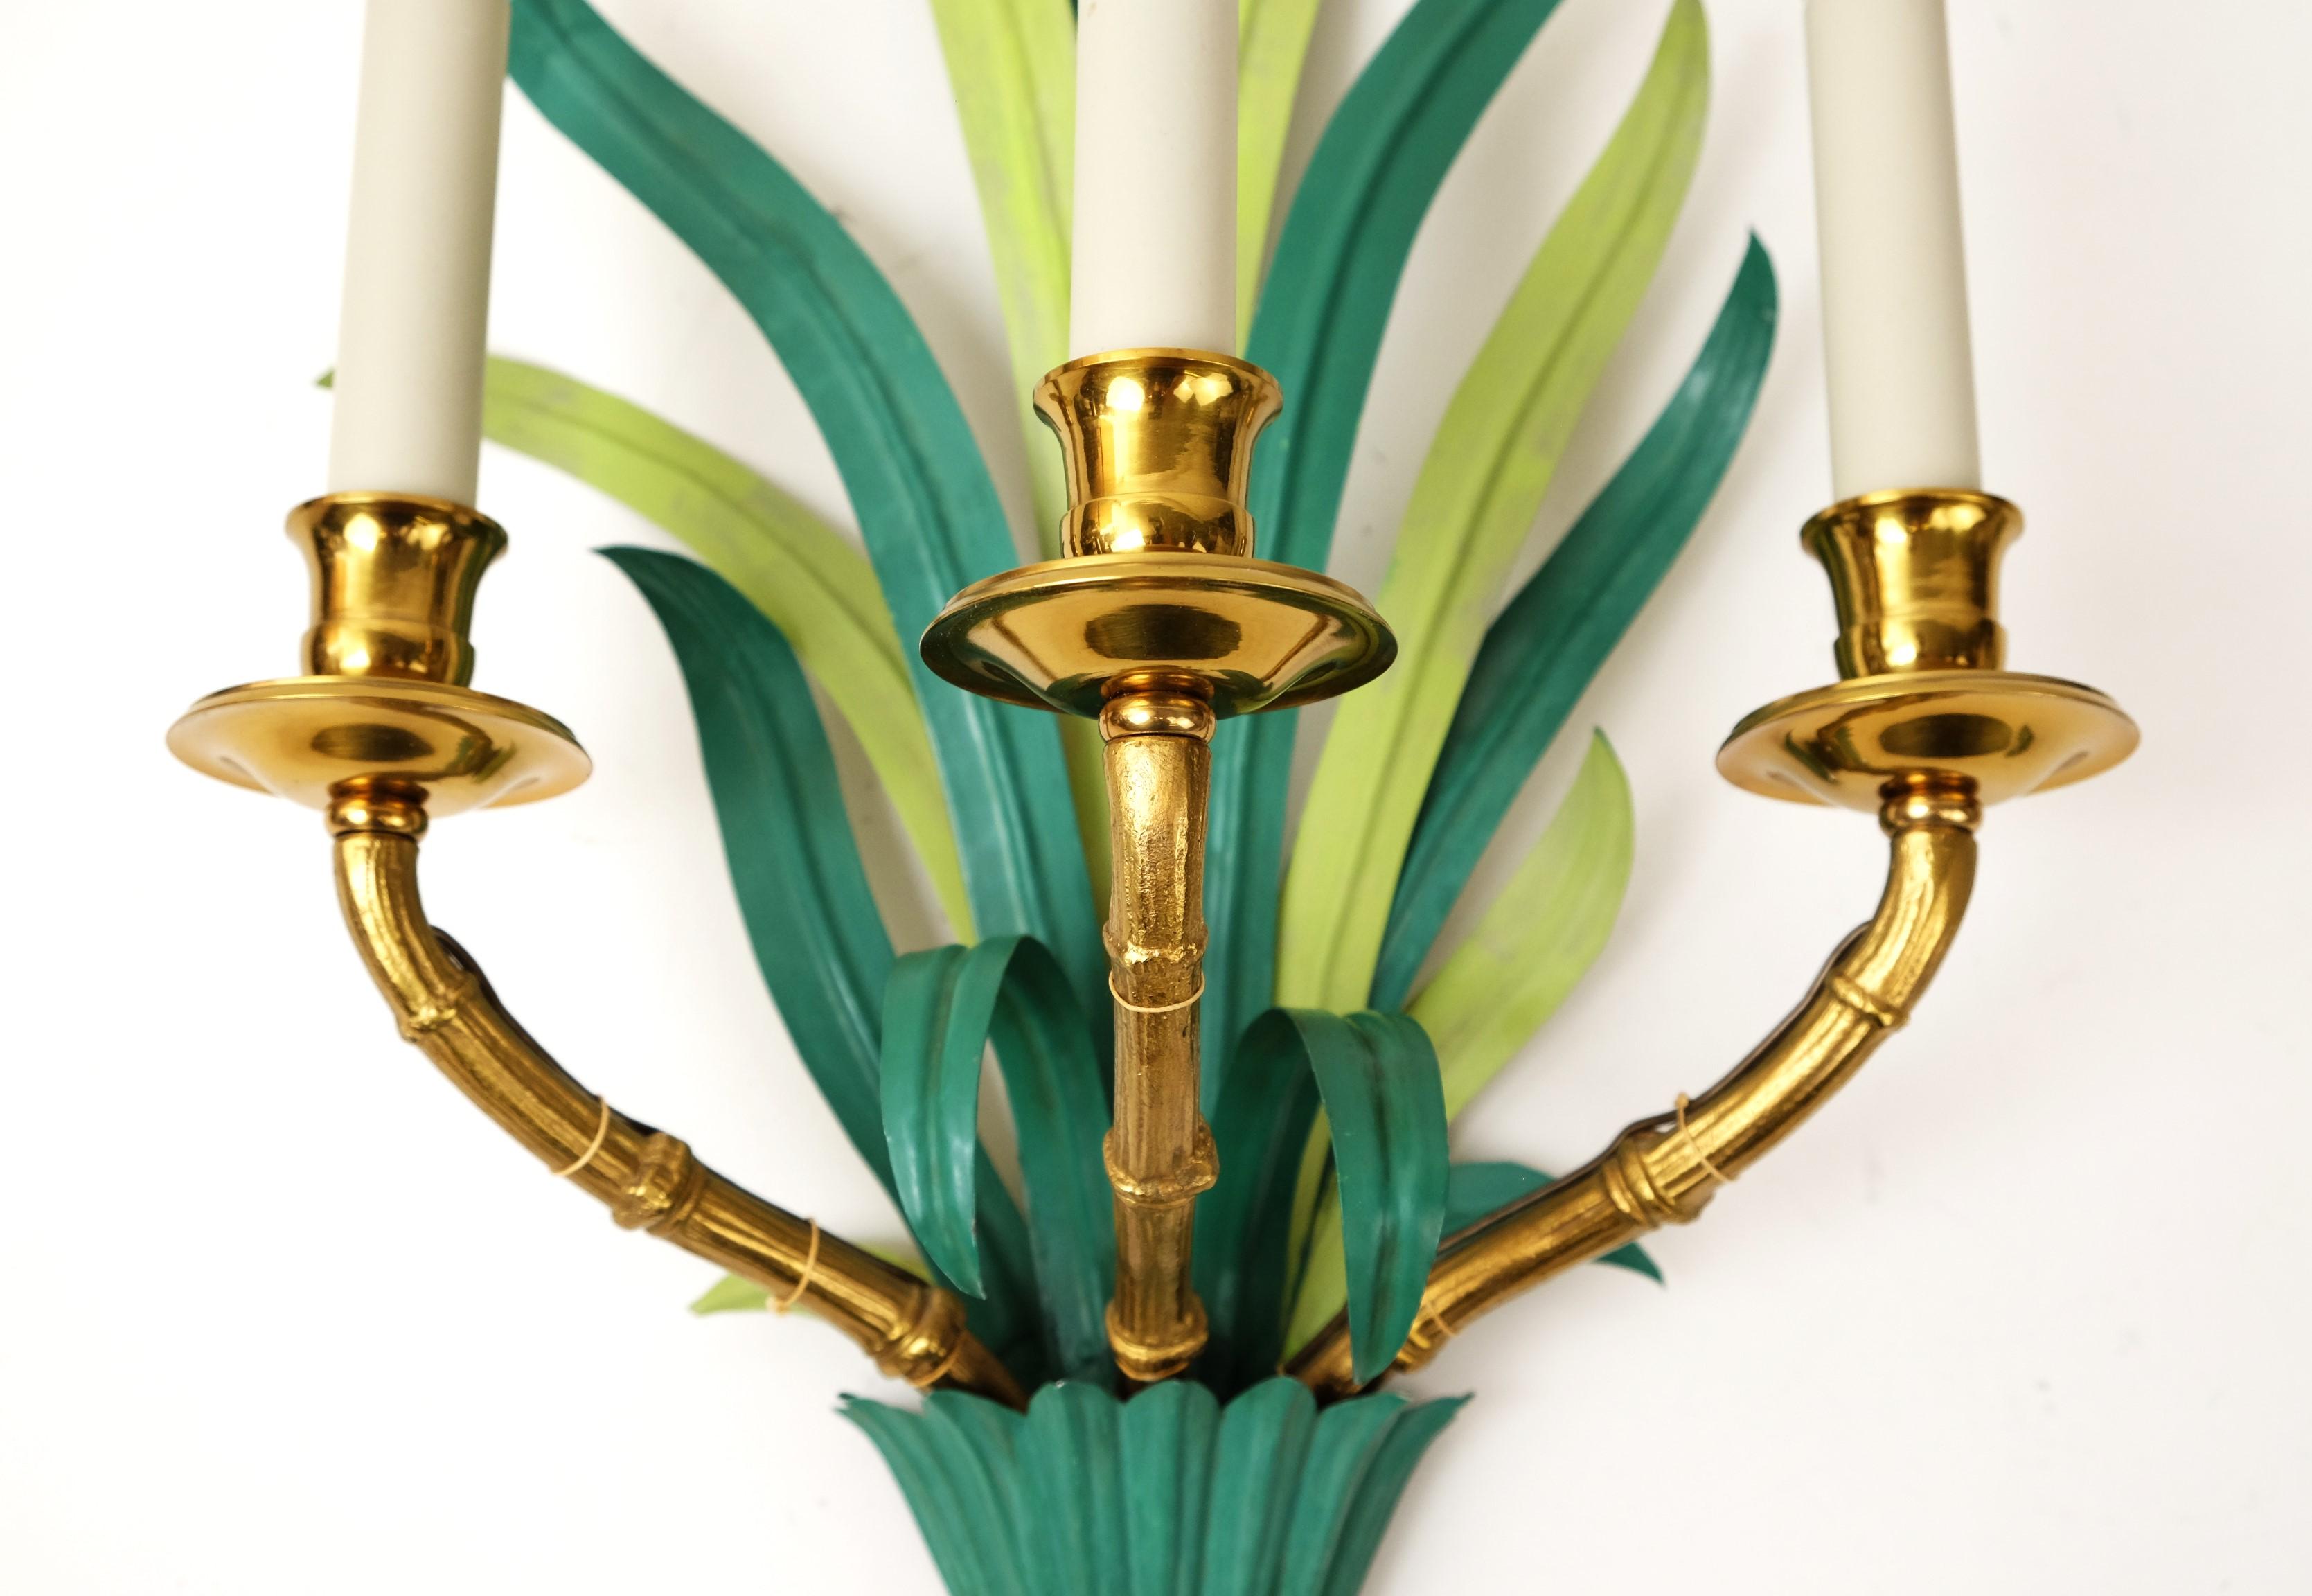 Pair of Wall Lamps / Sconces by Maison Bagues Bamboo Palm Leaves, France 1950s For Sale 10